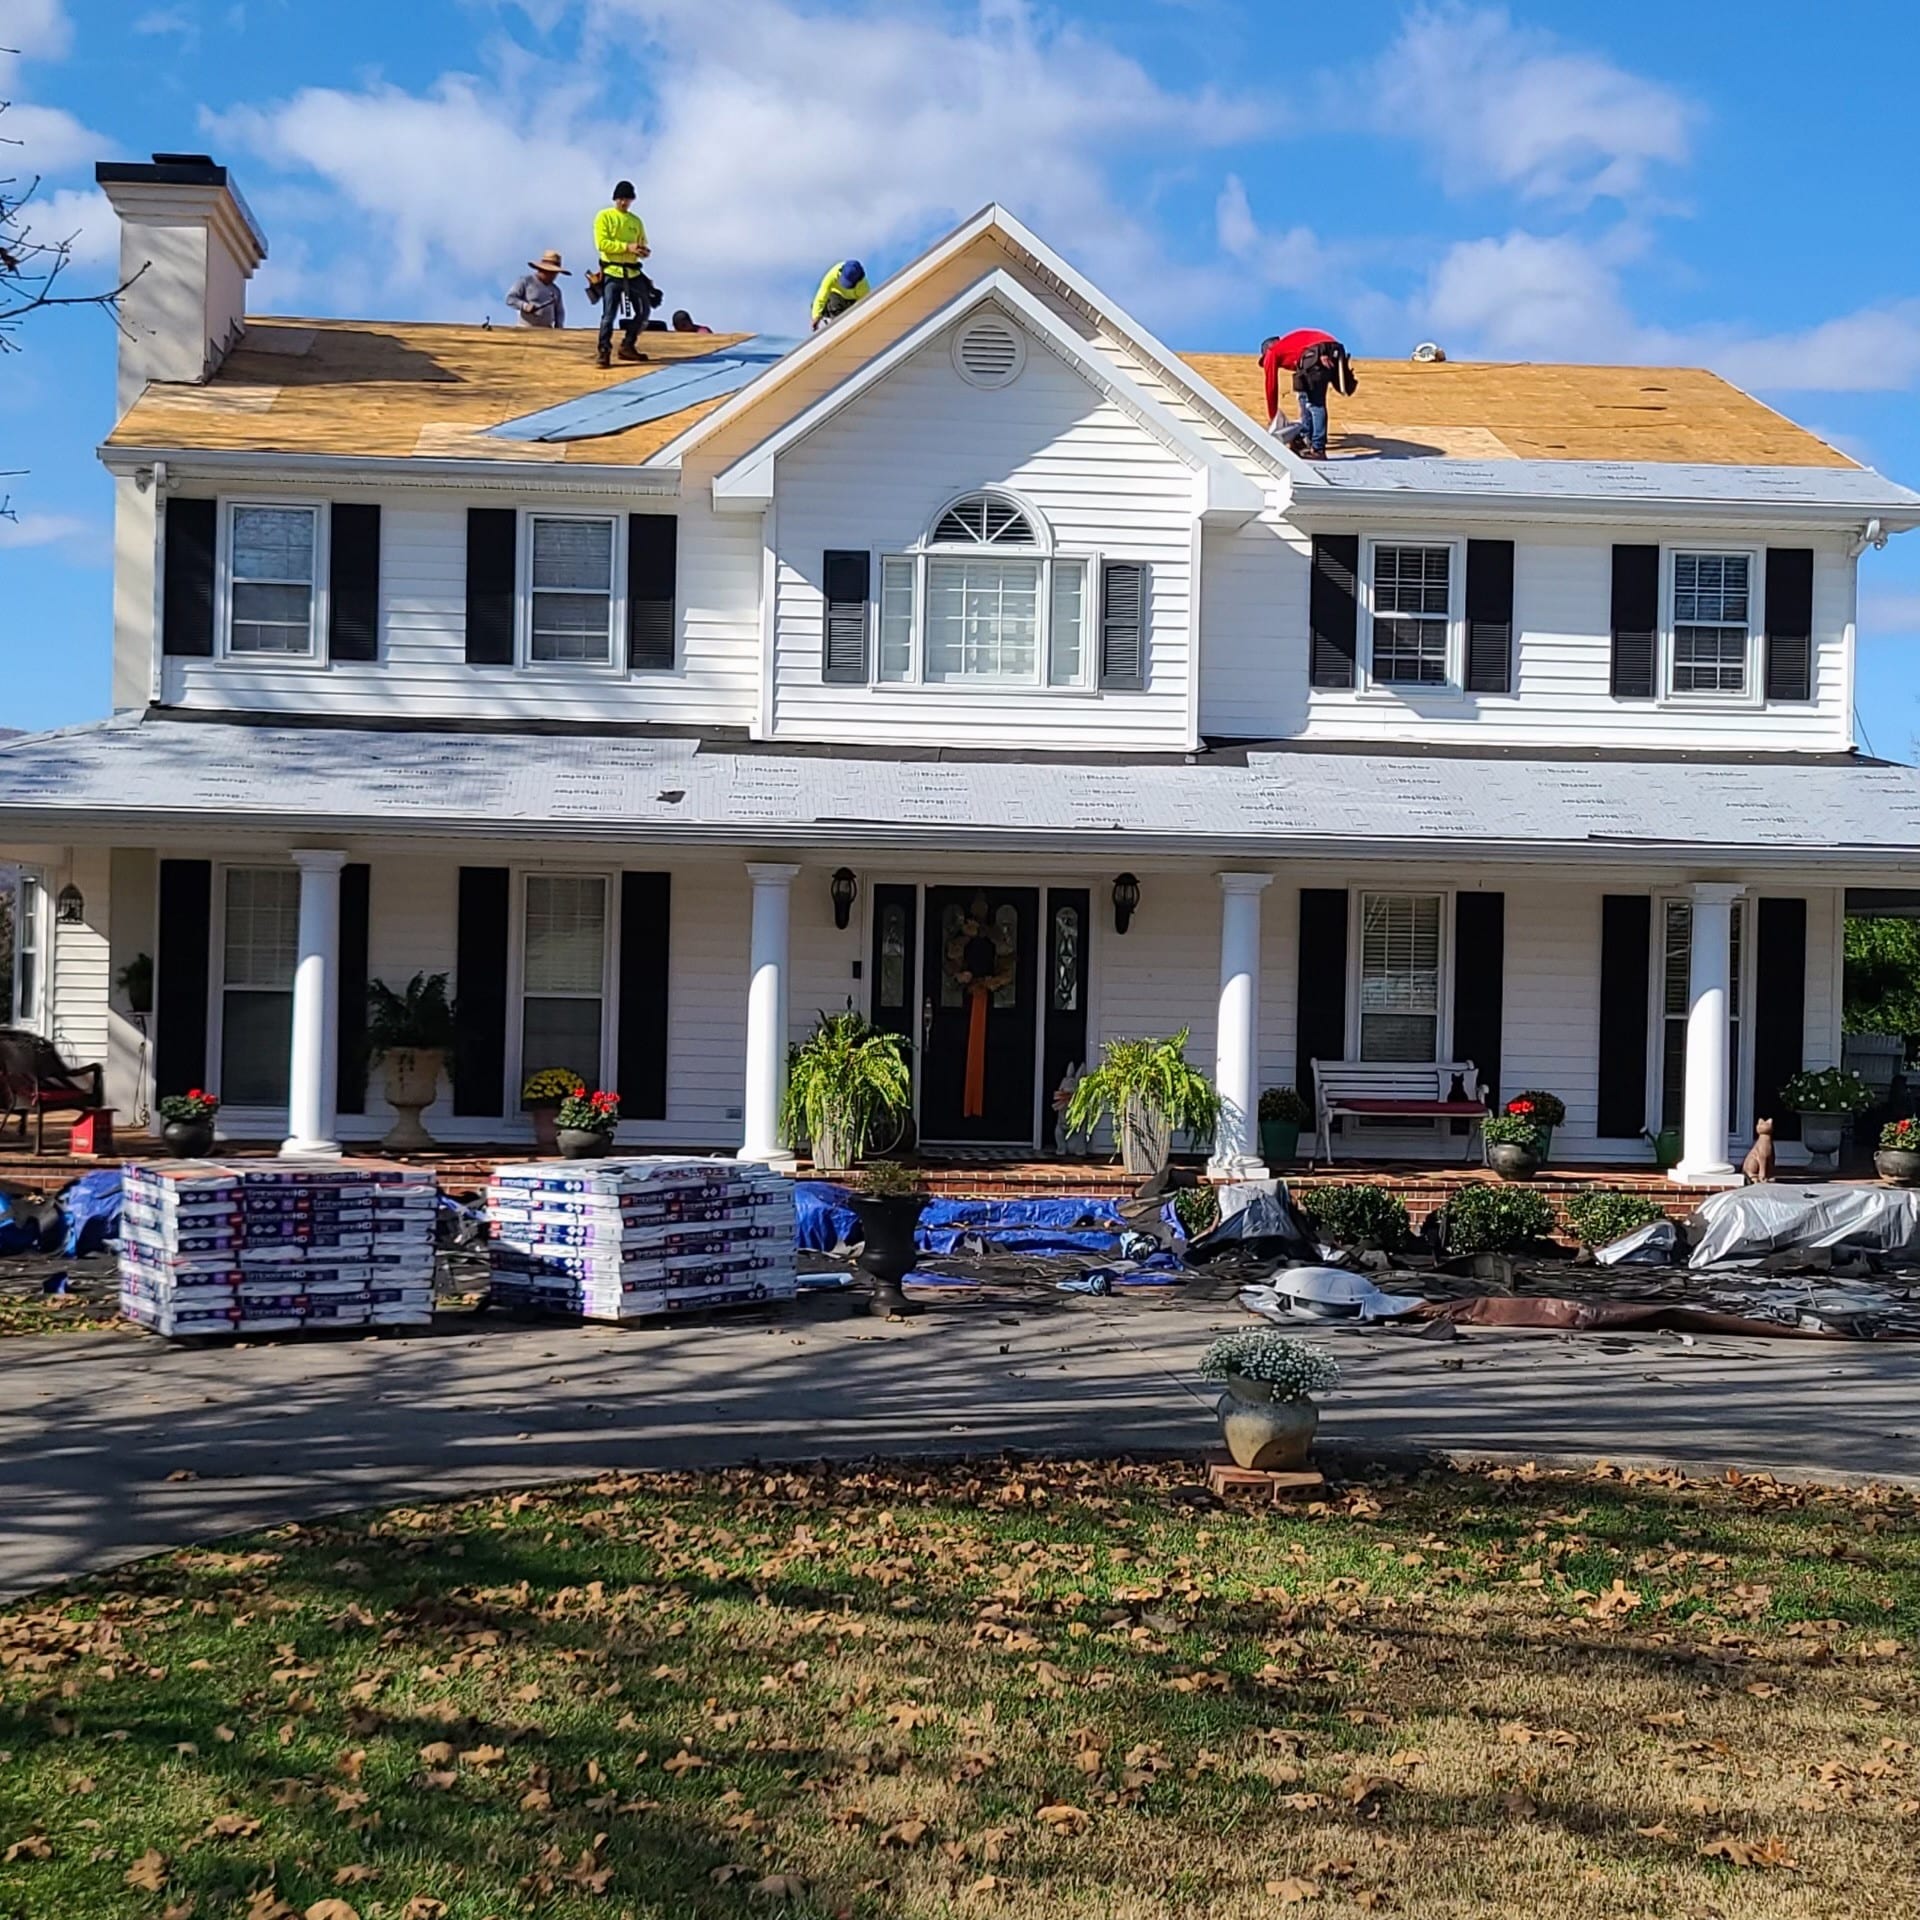 Premier Builders' crew working on reroofing a house.